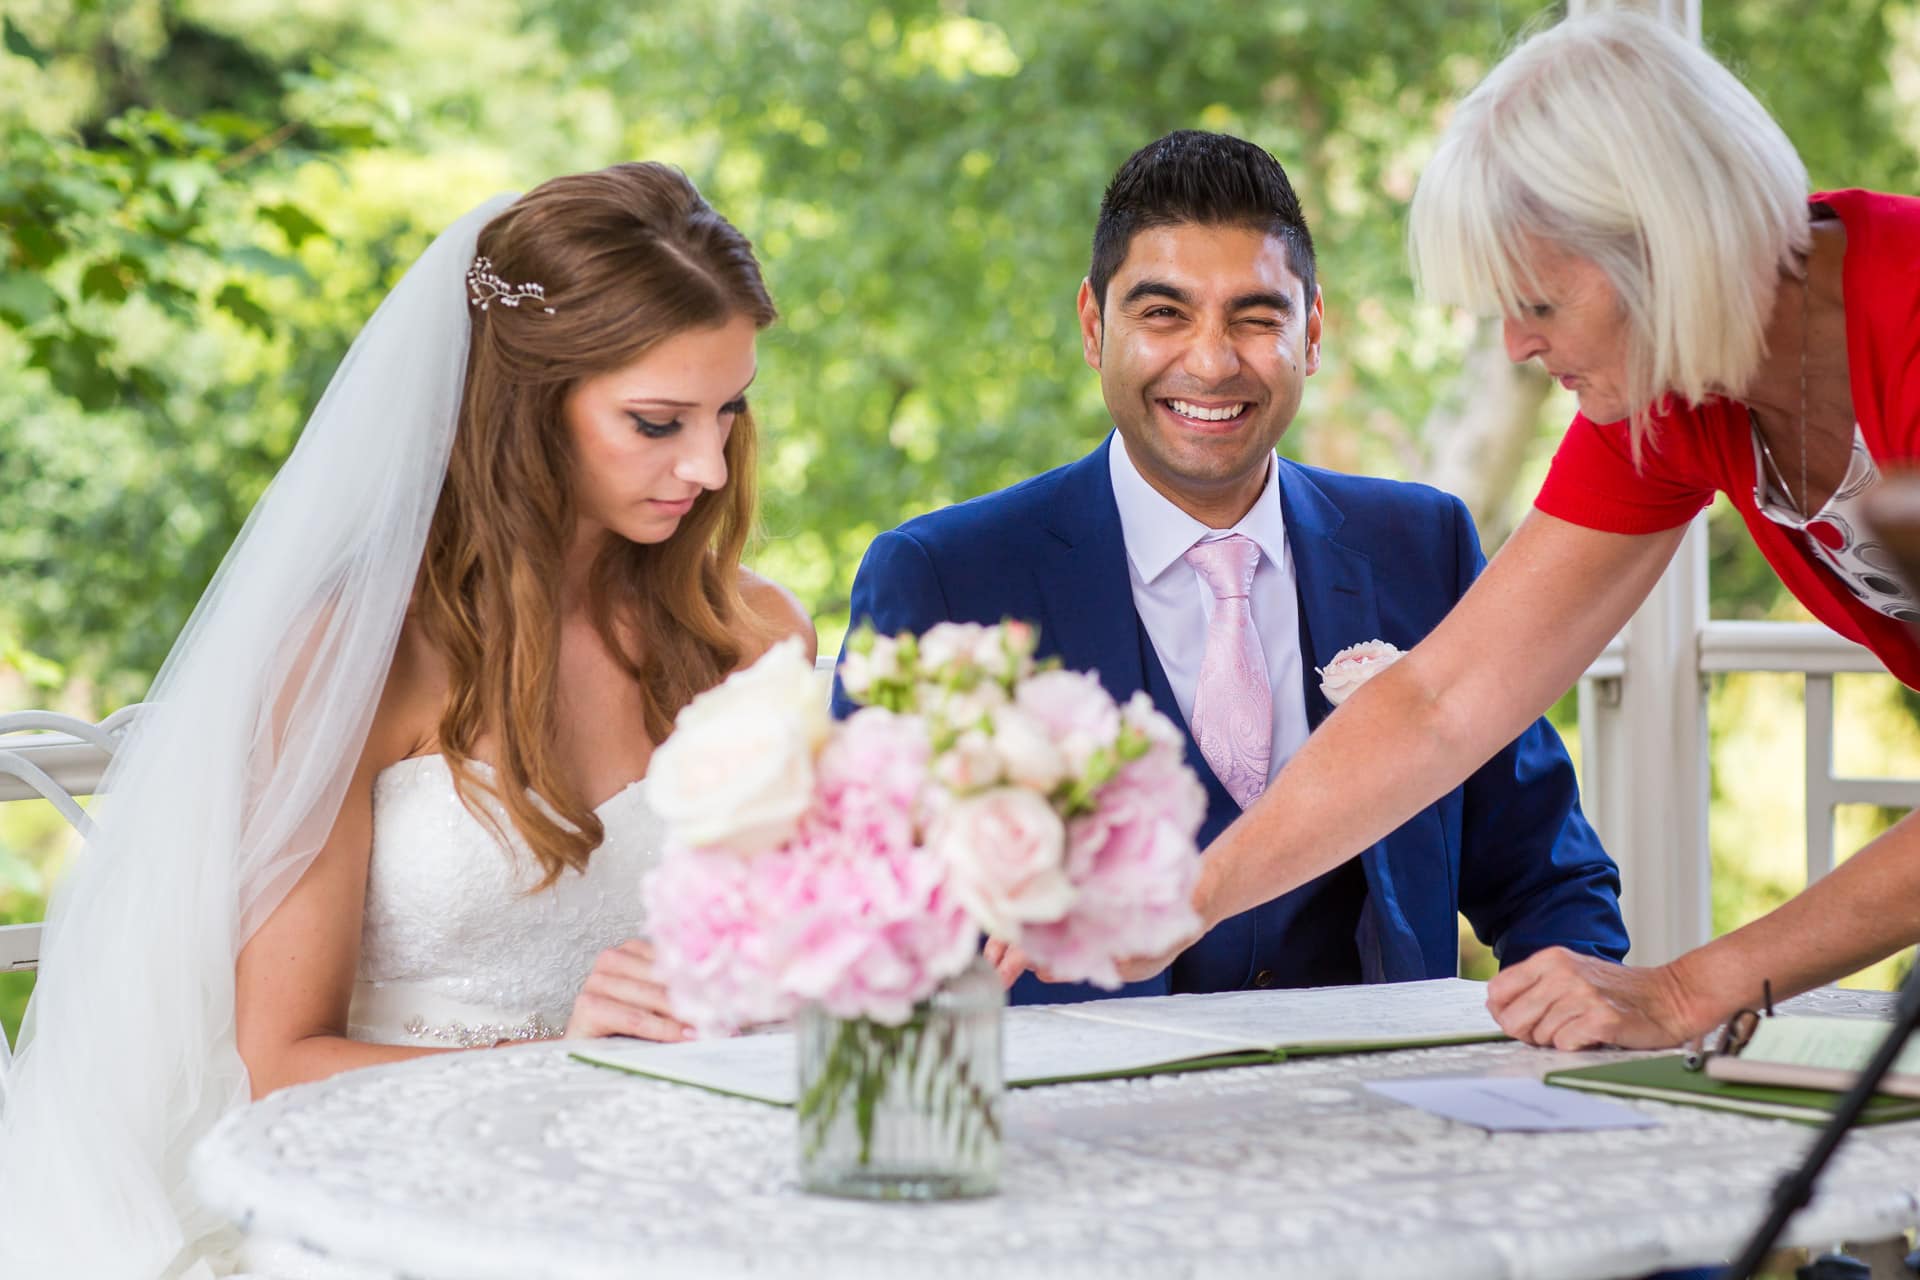 groom winking during signing the register